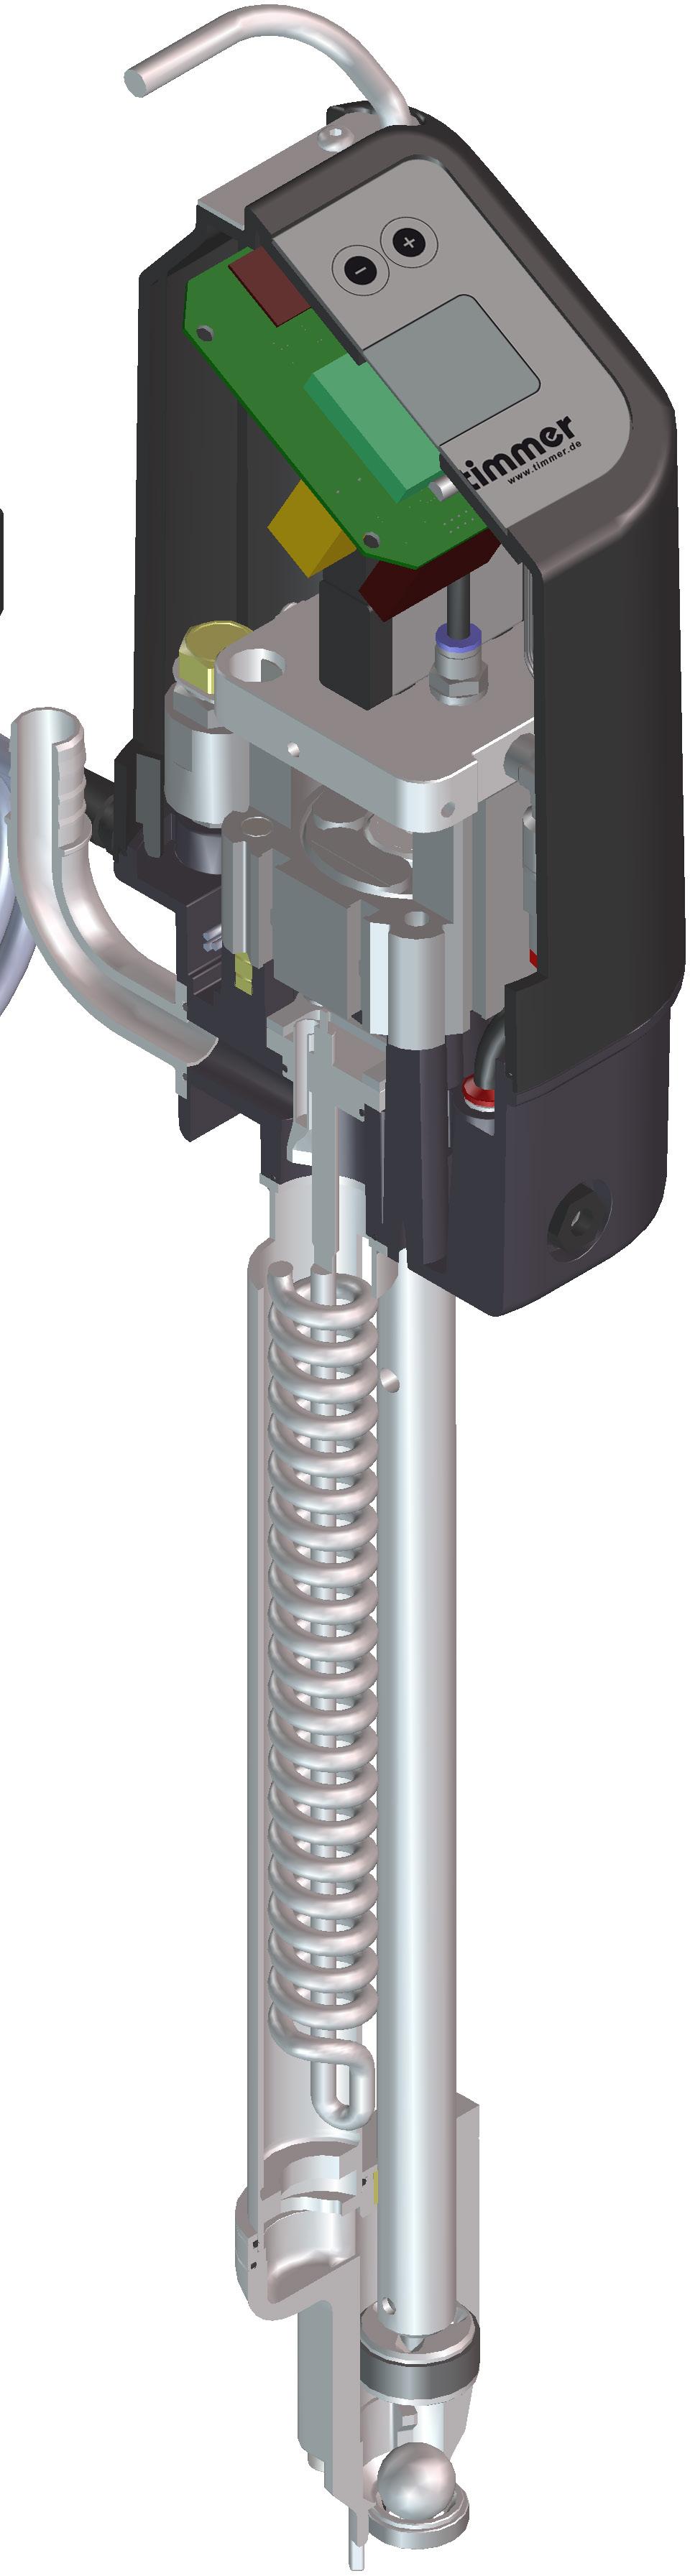 Pump series PTI-D3 Technical Data / Sectional View General data 140 mm 125 mm Actuator pneumatic, self-priming Suction height 2 m of water column (20 C) Transmission ratio 3,8:1 Max.